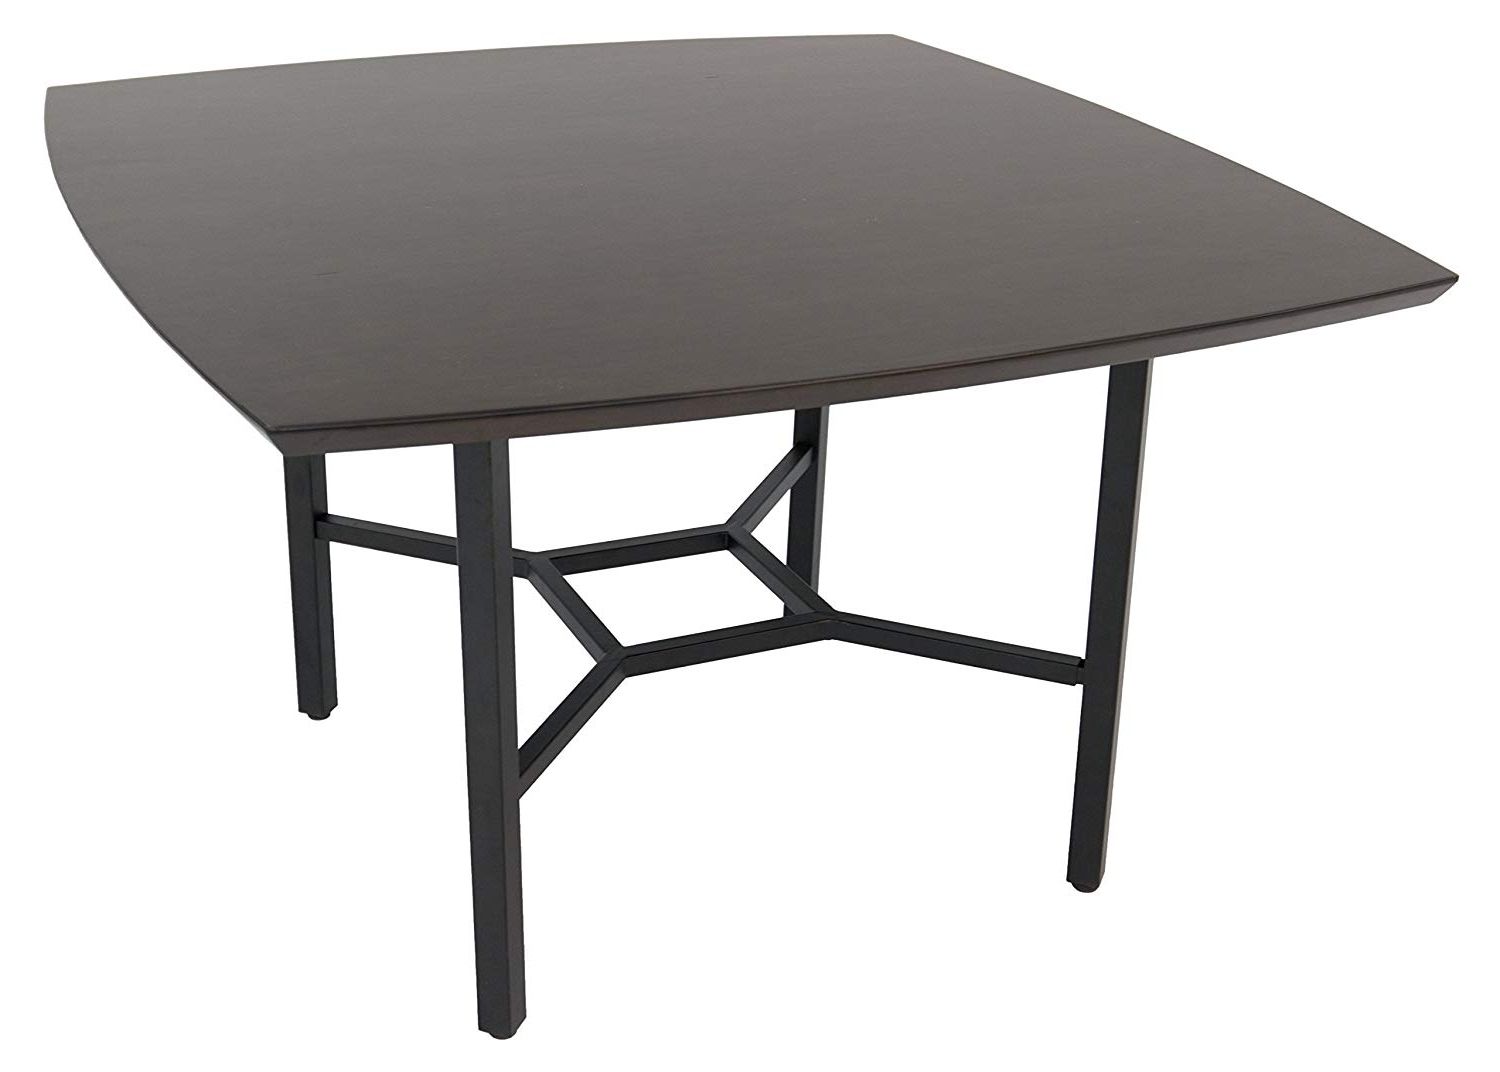 Weathered Gray Owen Pedestal Extending Dining Tables Inside Preferred Amazon – Impacterra Falkland Square Dining Table (View 16 of 25)